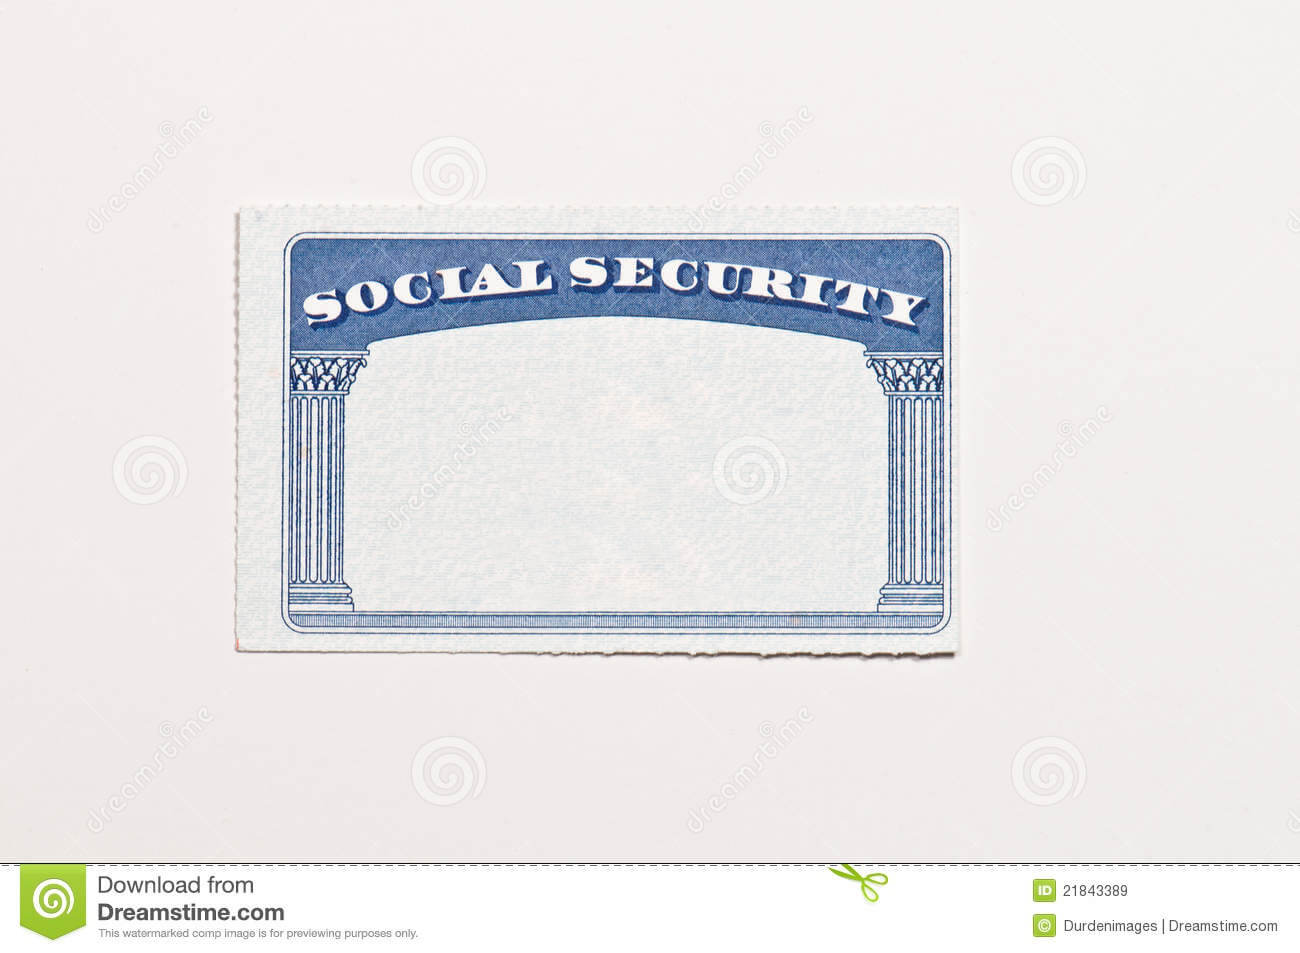 Blank Social Security Card Stock Image. Image Of Document With Blank Social Security Card Template